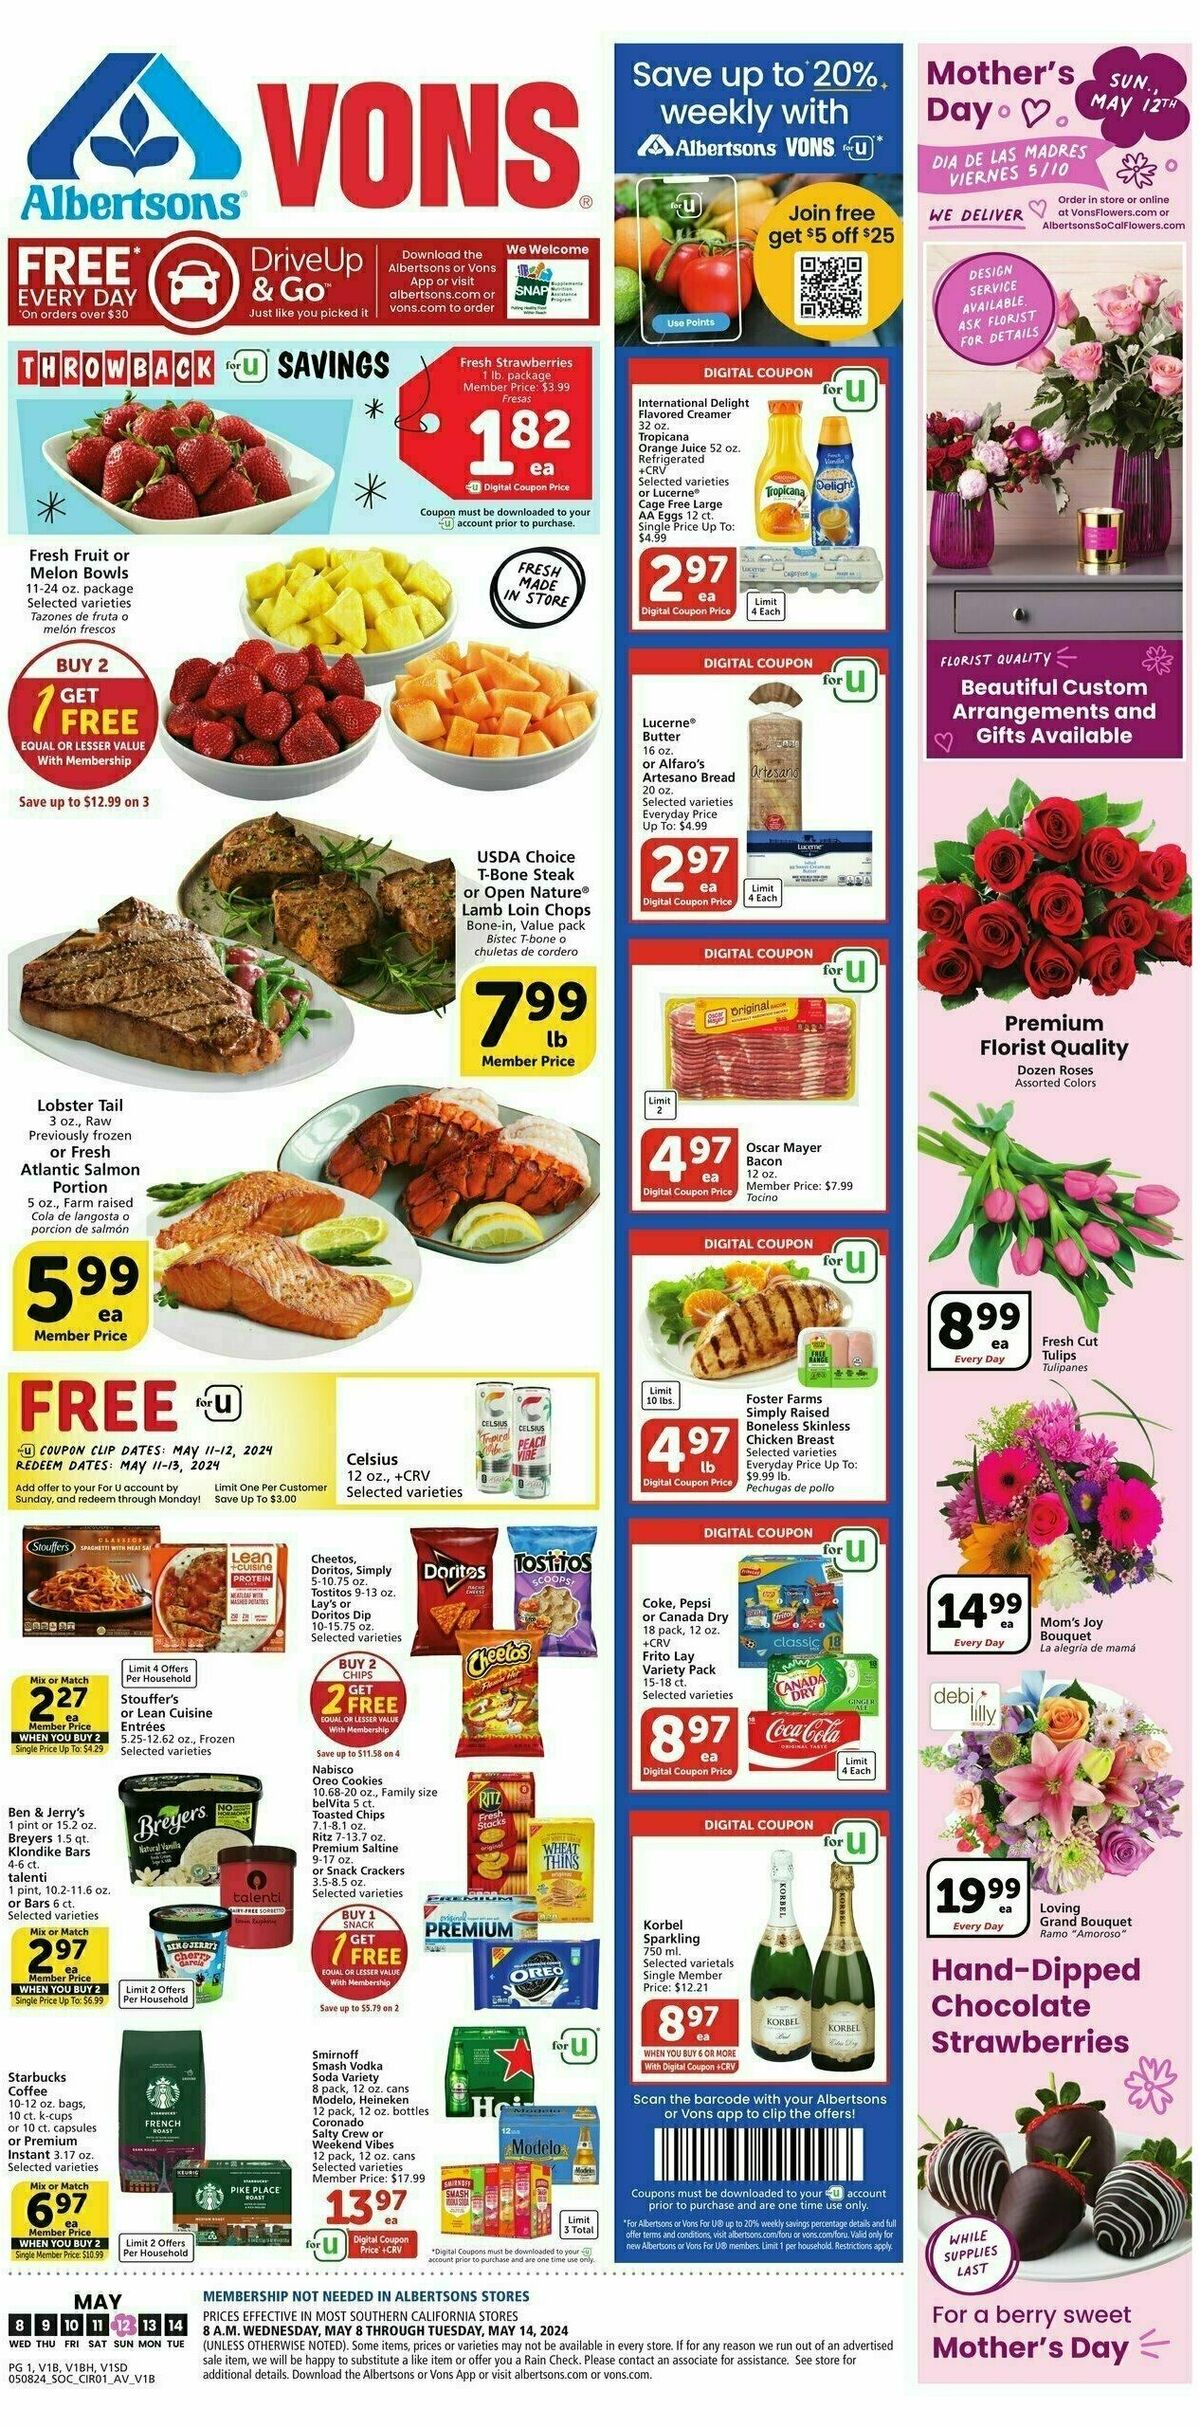 Vons Weekly Ad from May 8